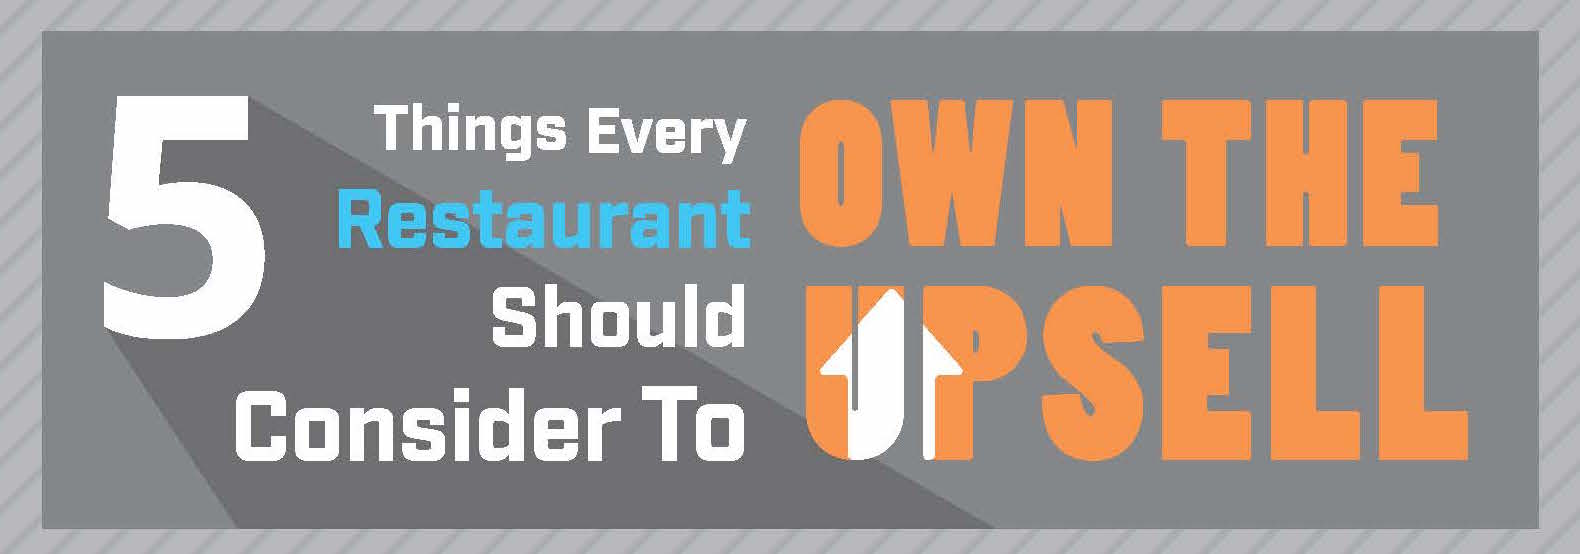 5 Things Every Restaurant Should Consider to Own The Upsell - Full Contact Advertising